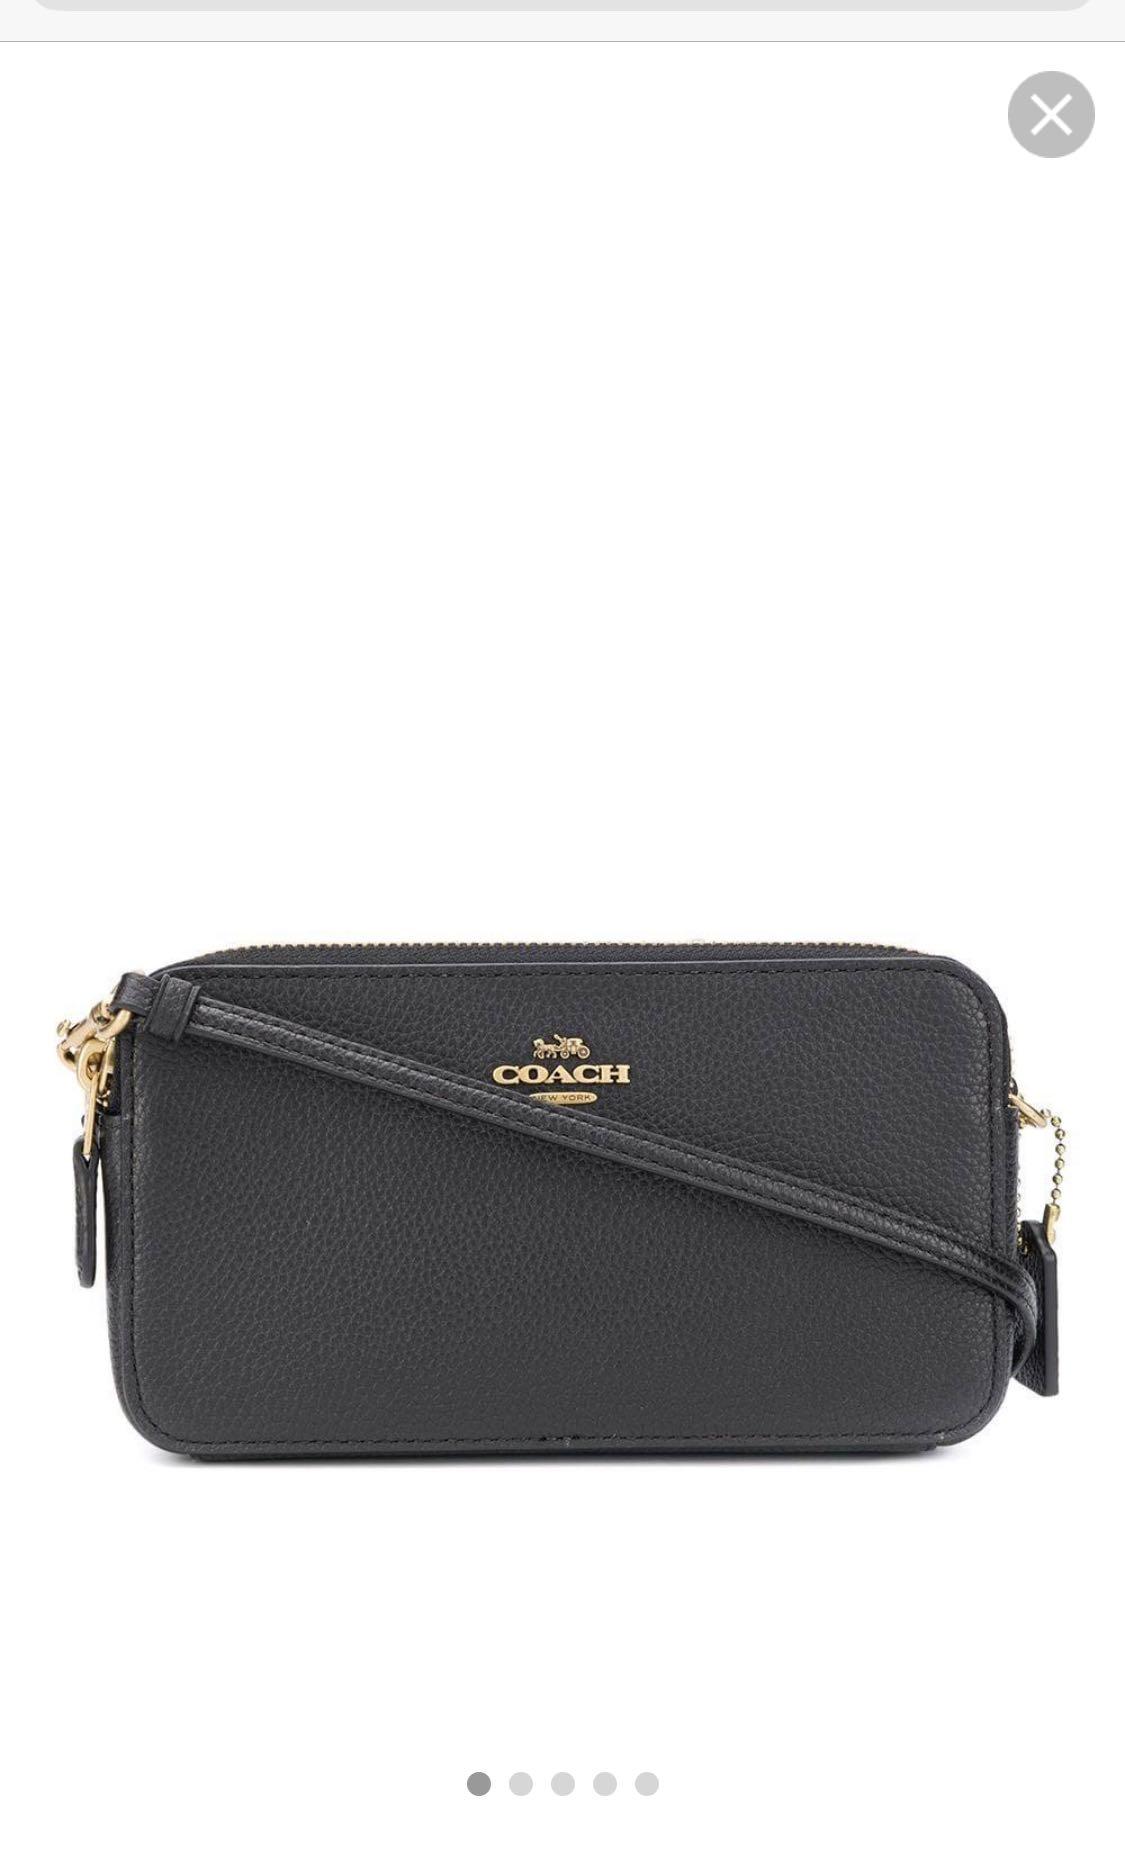 Small Leather Purse - ROMY TISA